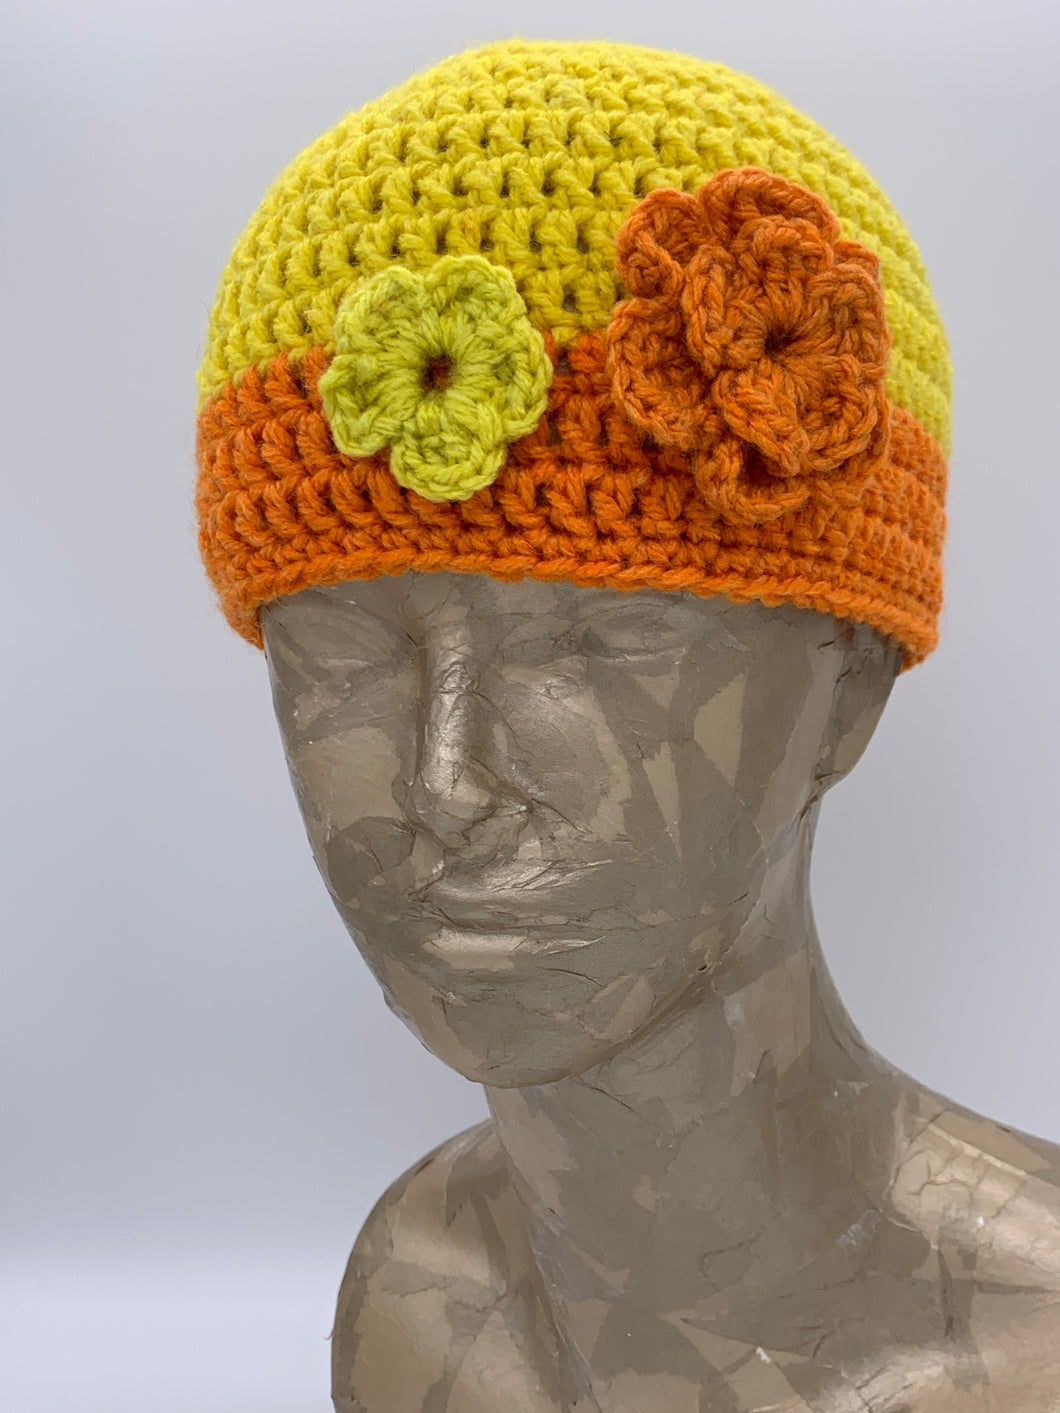 Crochet two tone yellow and orange beanie hat with flower detail- Size Toddler 1-3 yrs